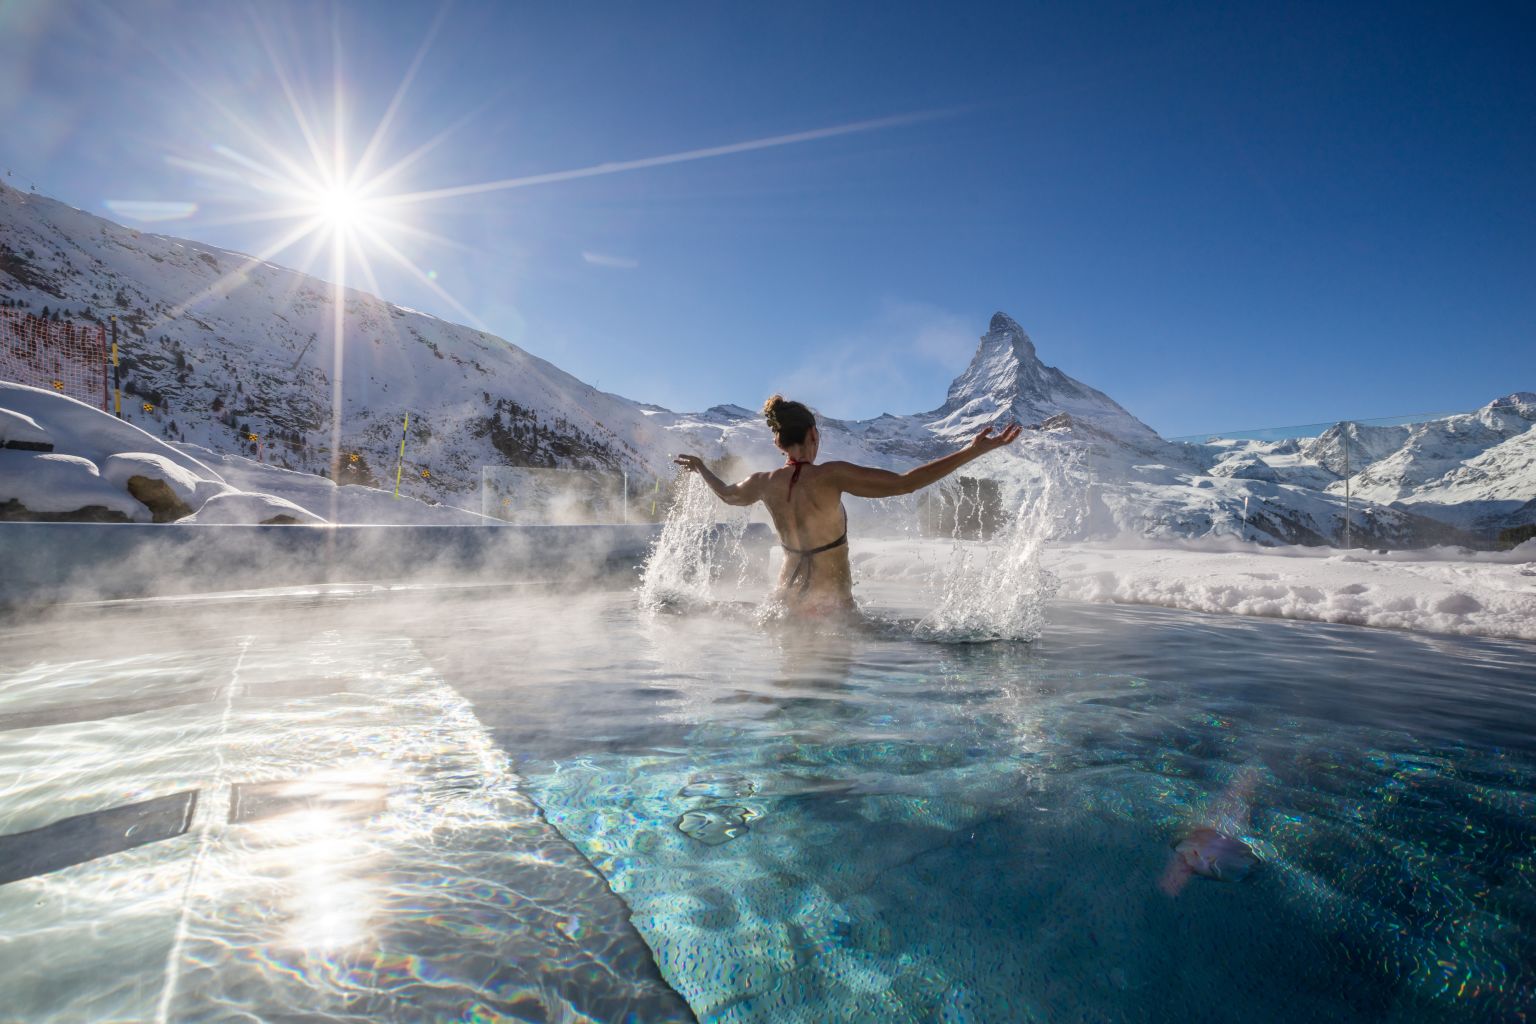 The Riffelalp hotel is located on the slopes of Zermatt, at the foot of the Matterhorn